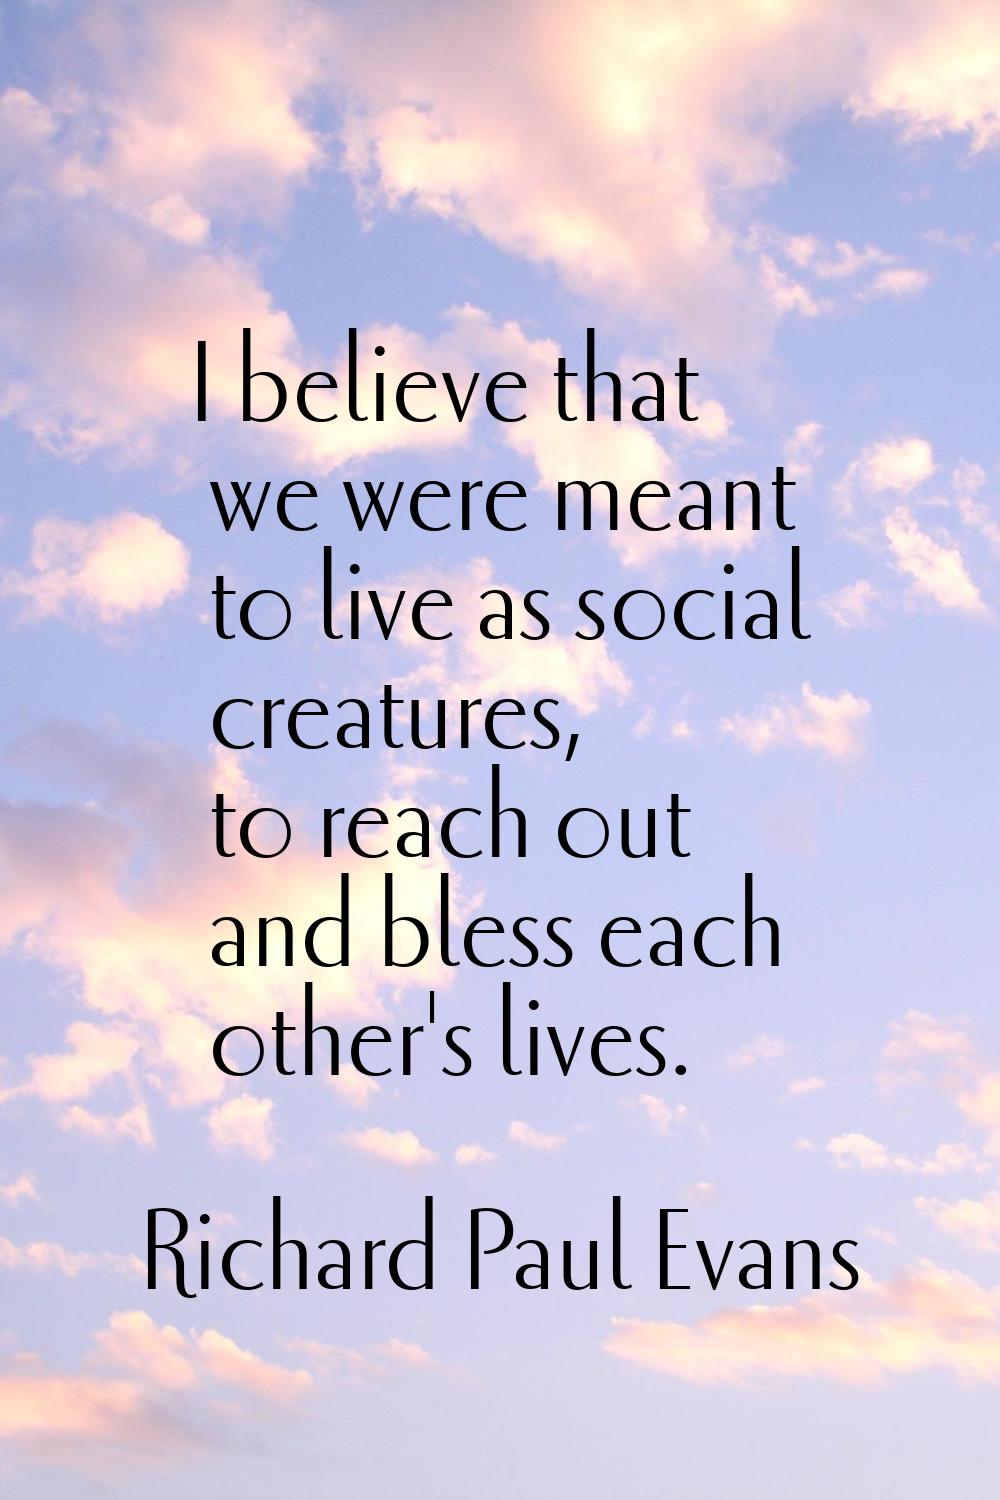 I believe that we were meant to live as social creatures, to reach out and bless each other's lives